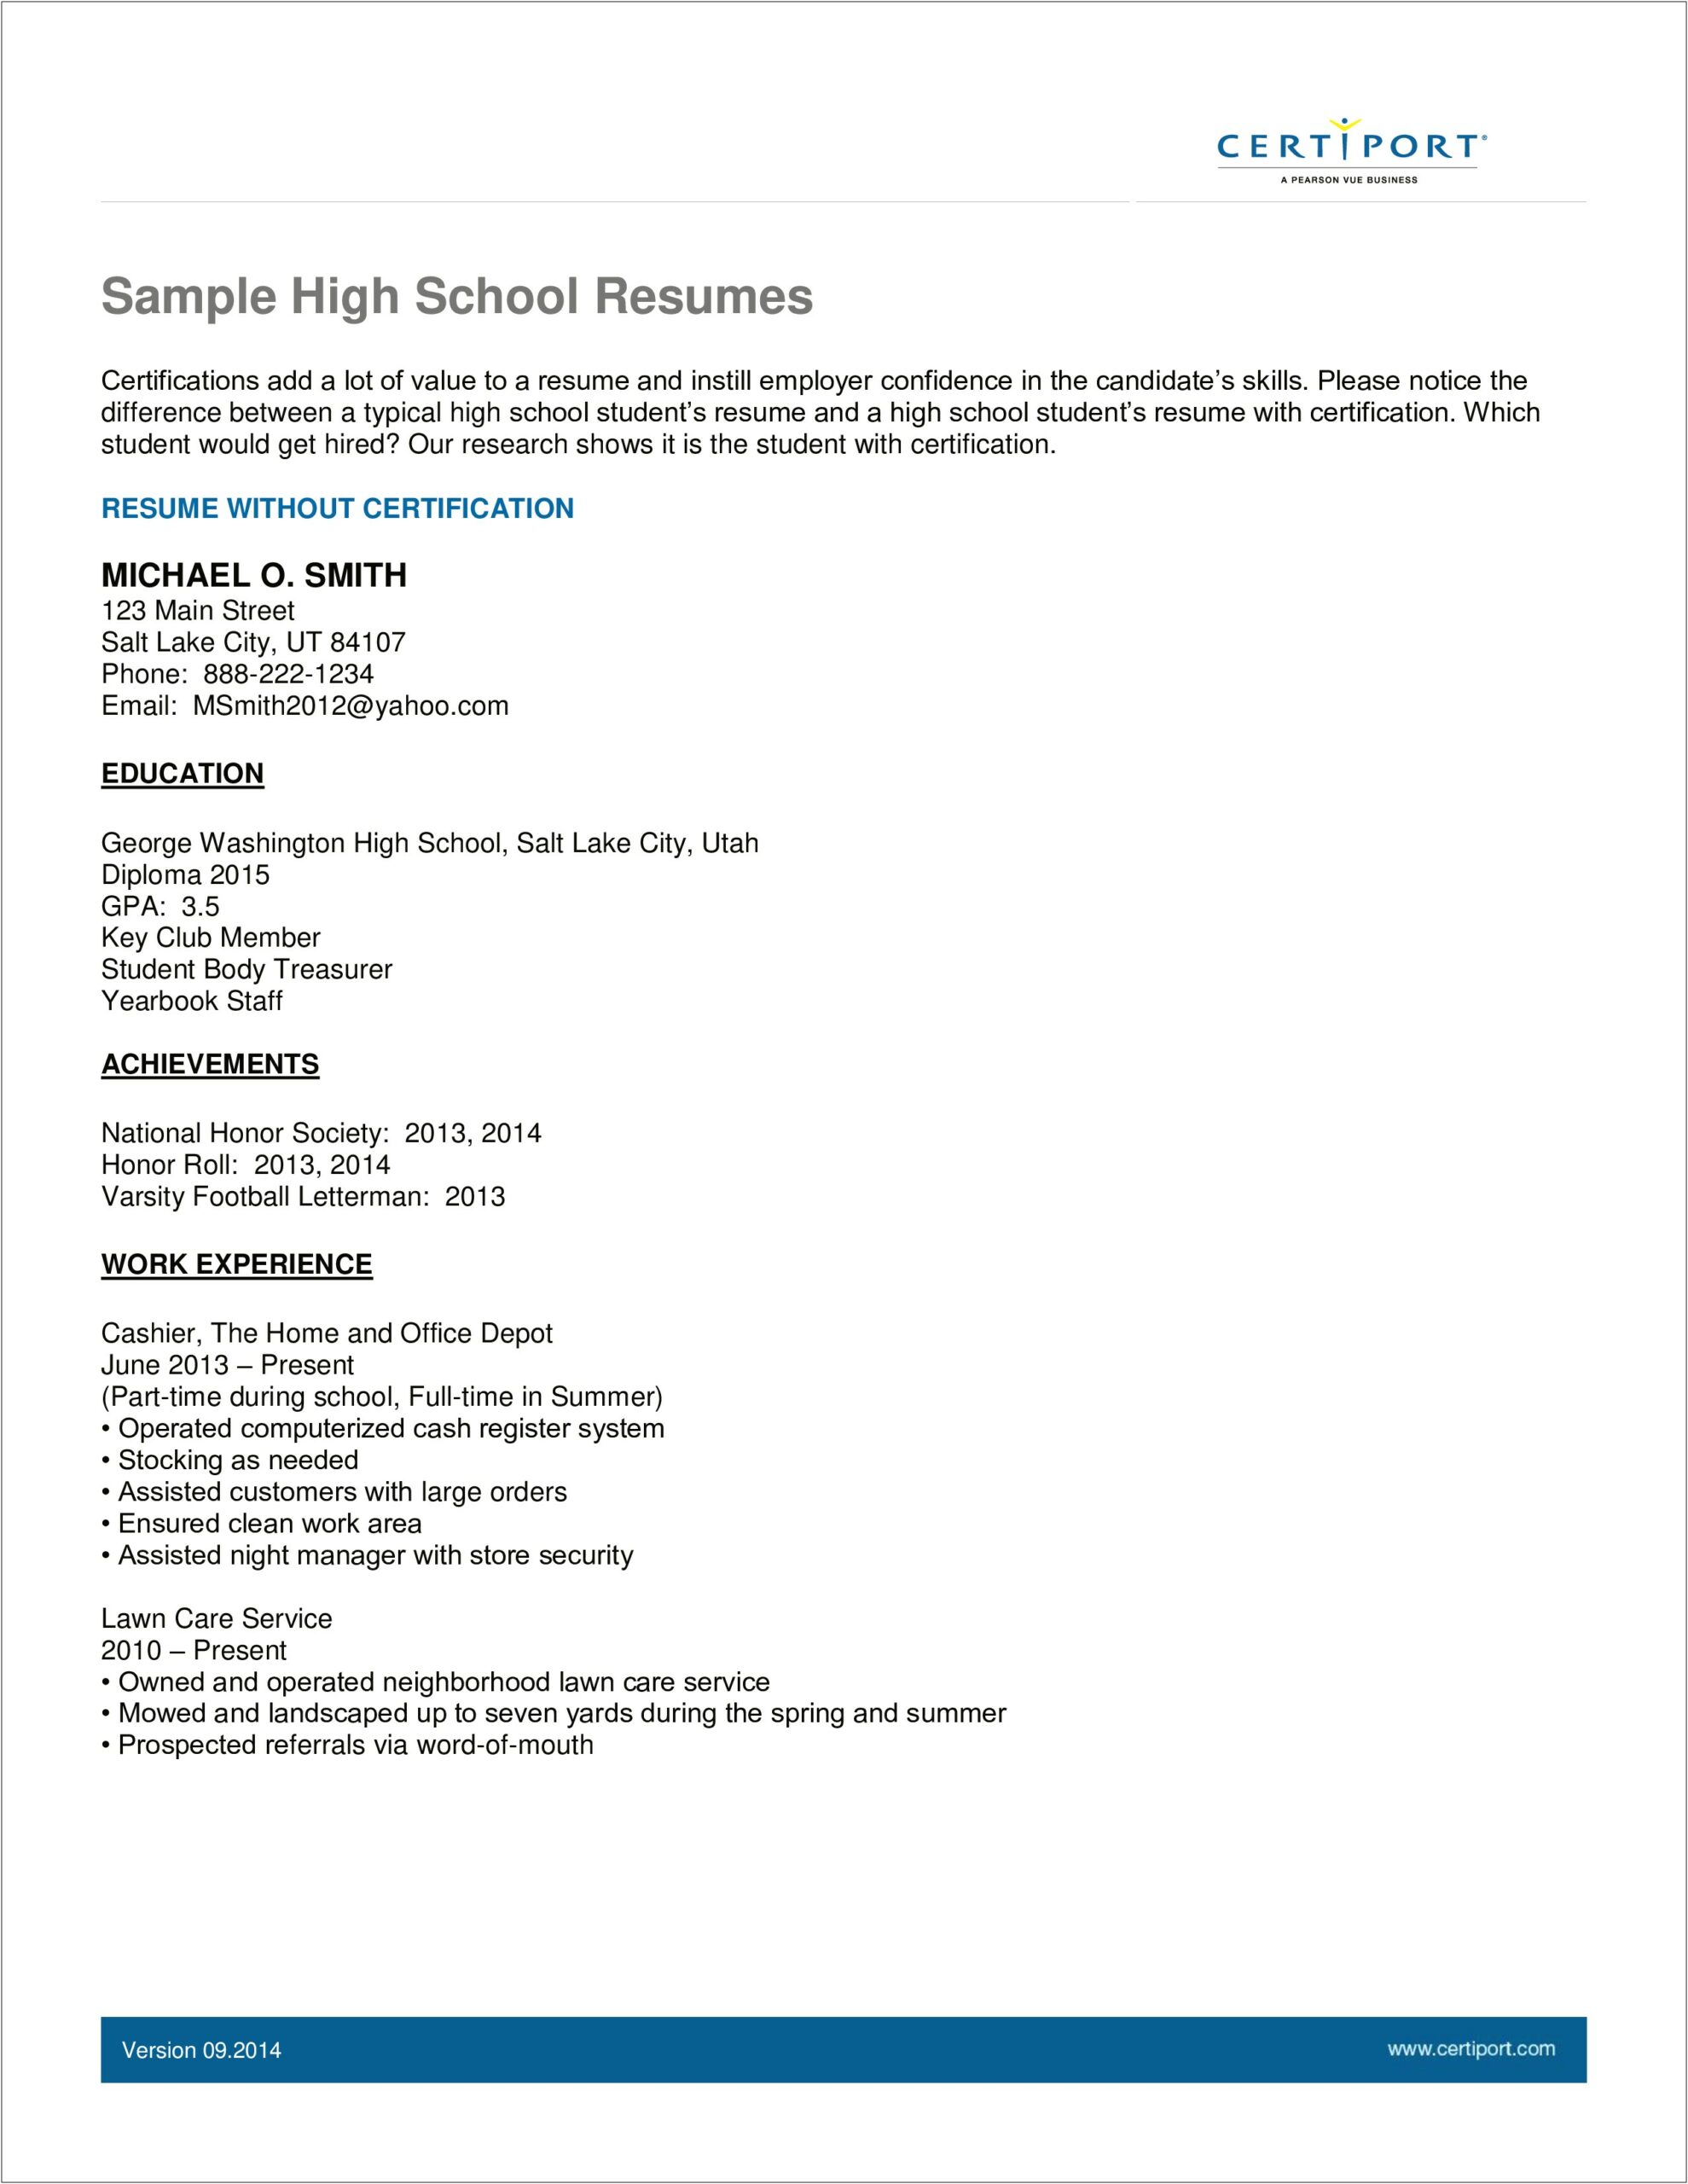 Resume Template While Still In High School